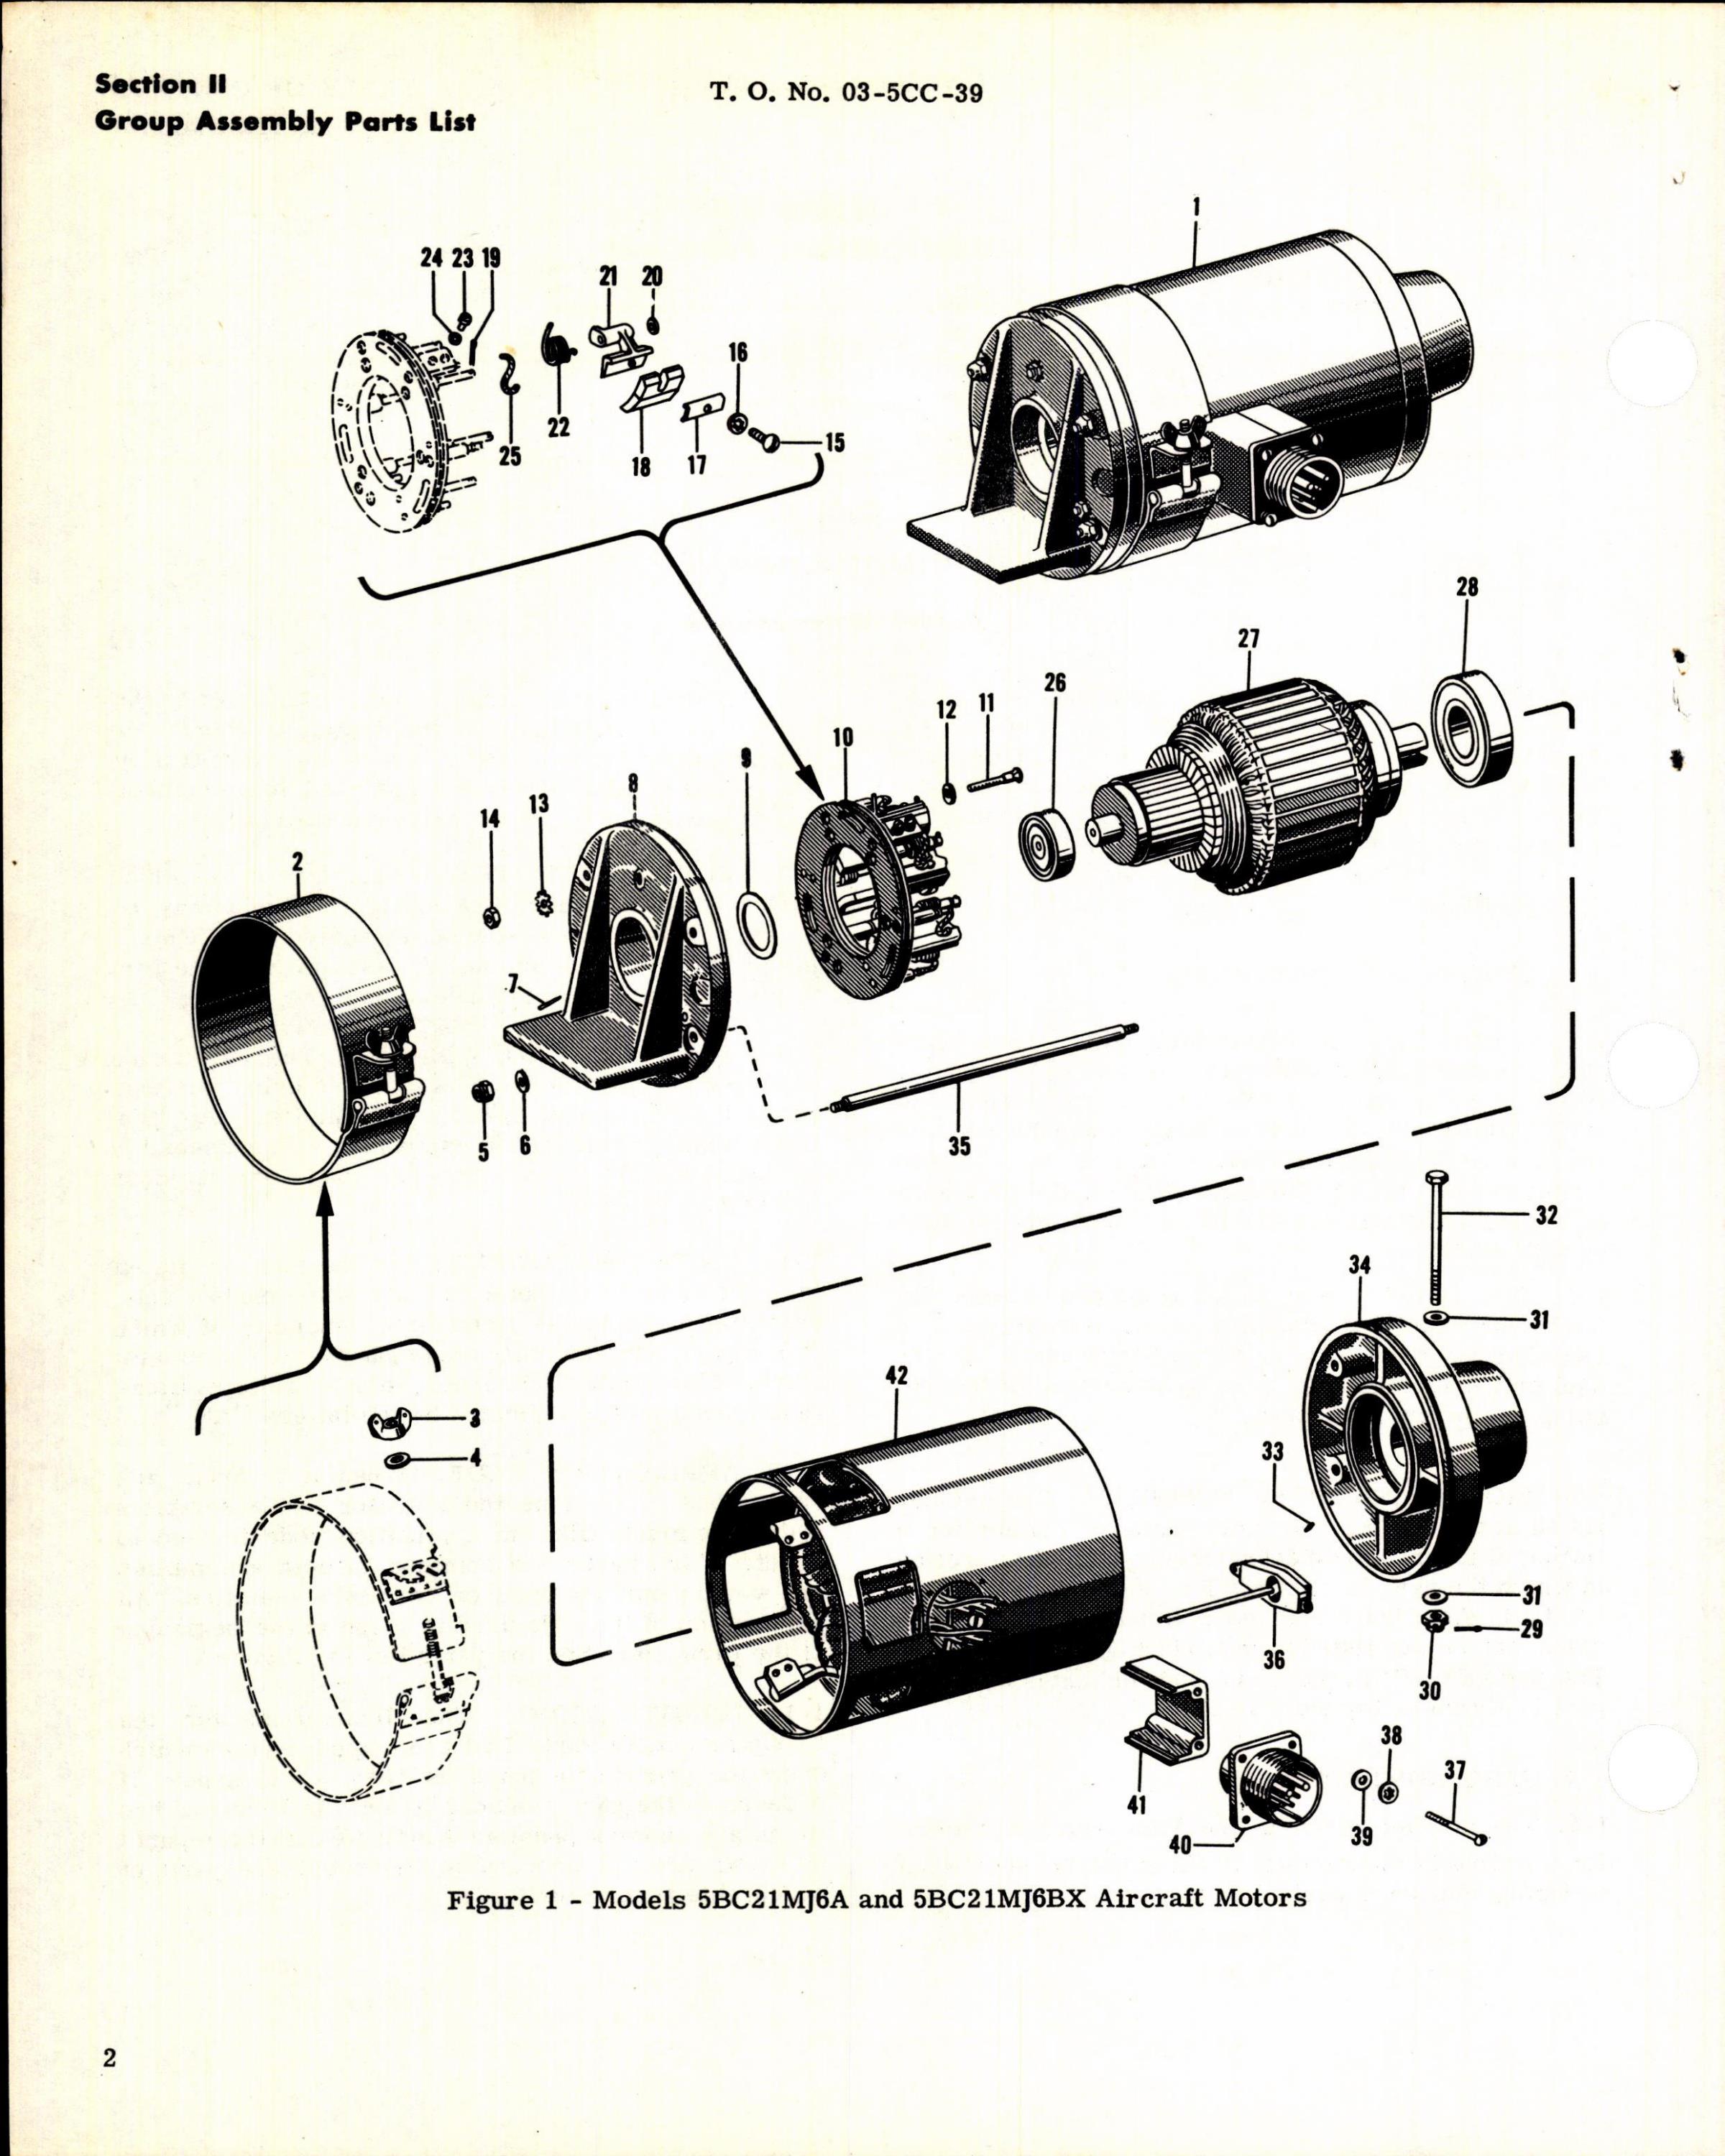 Sample page 4 from AirCorps Library document: Parts Catalog for General Electric Aircraft Motors, Series 5BC21